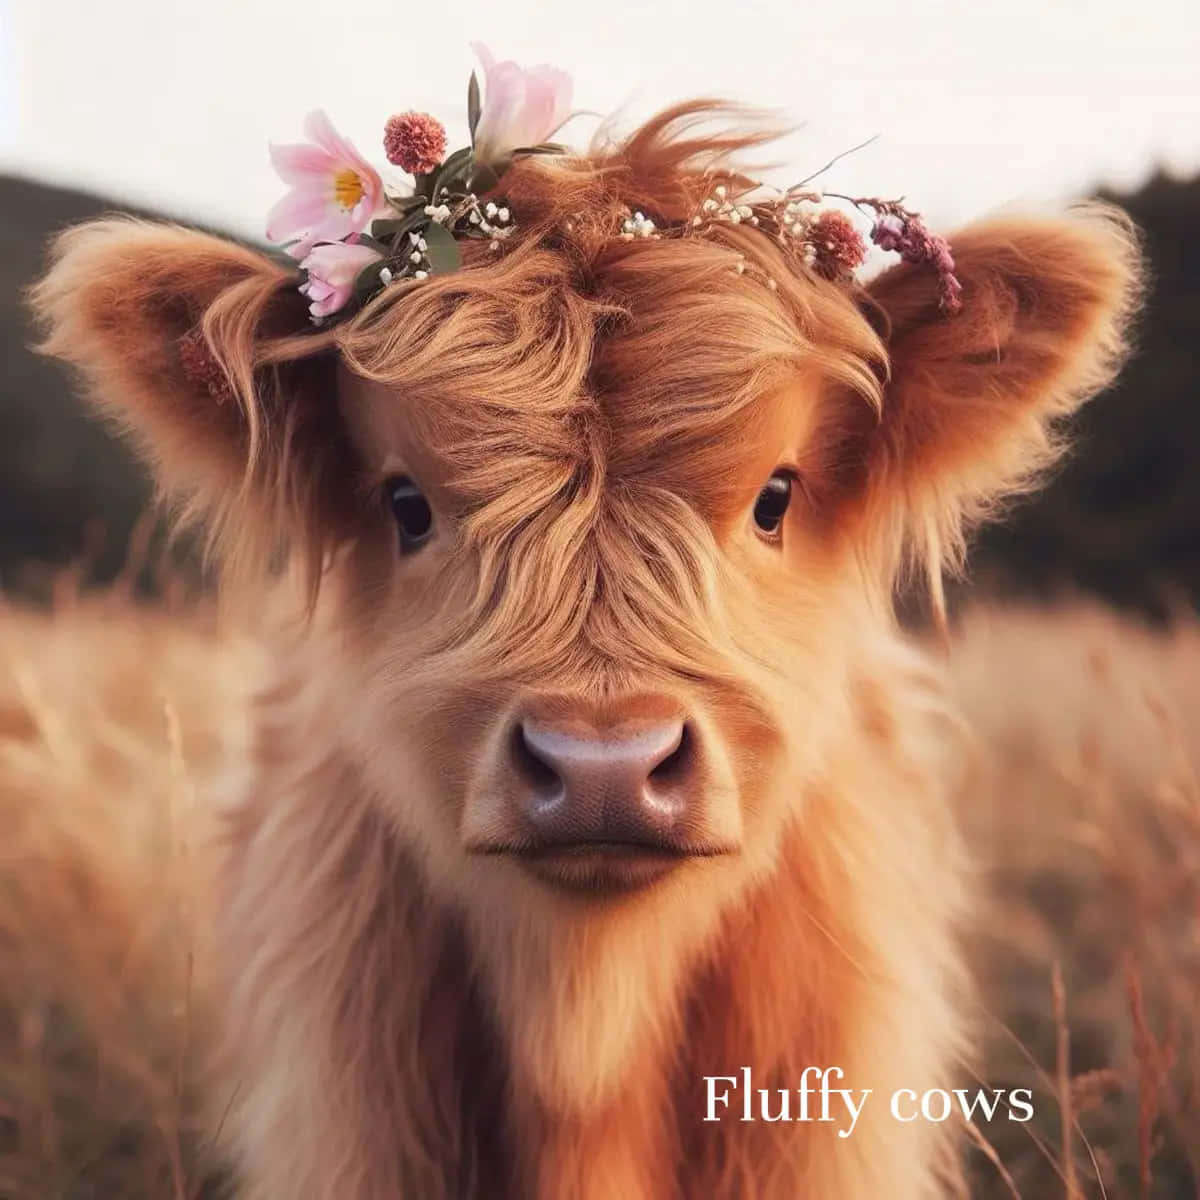 Fluffy Cow With Flower Crown.jpg Wallpaper